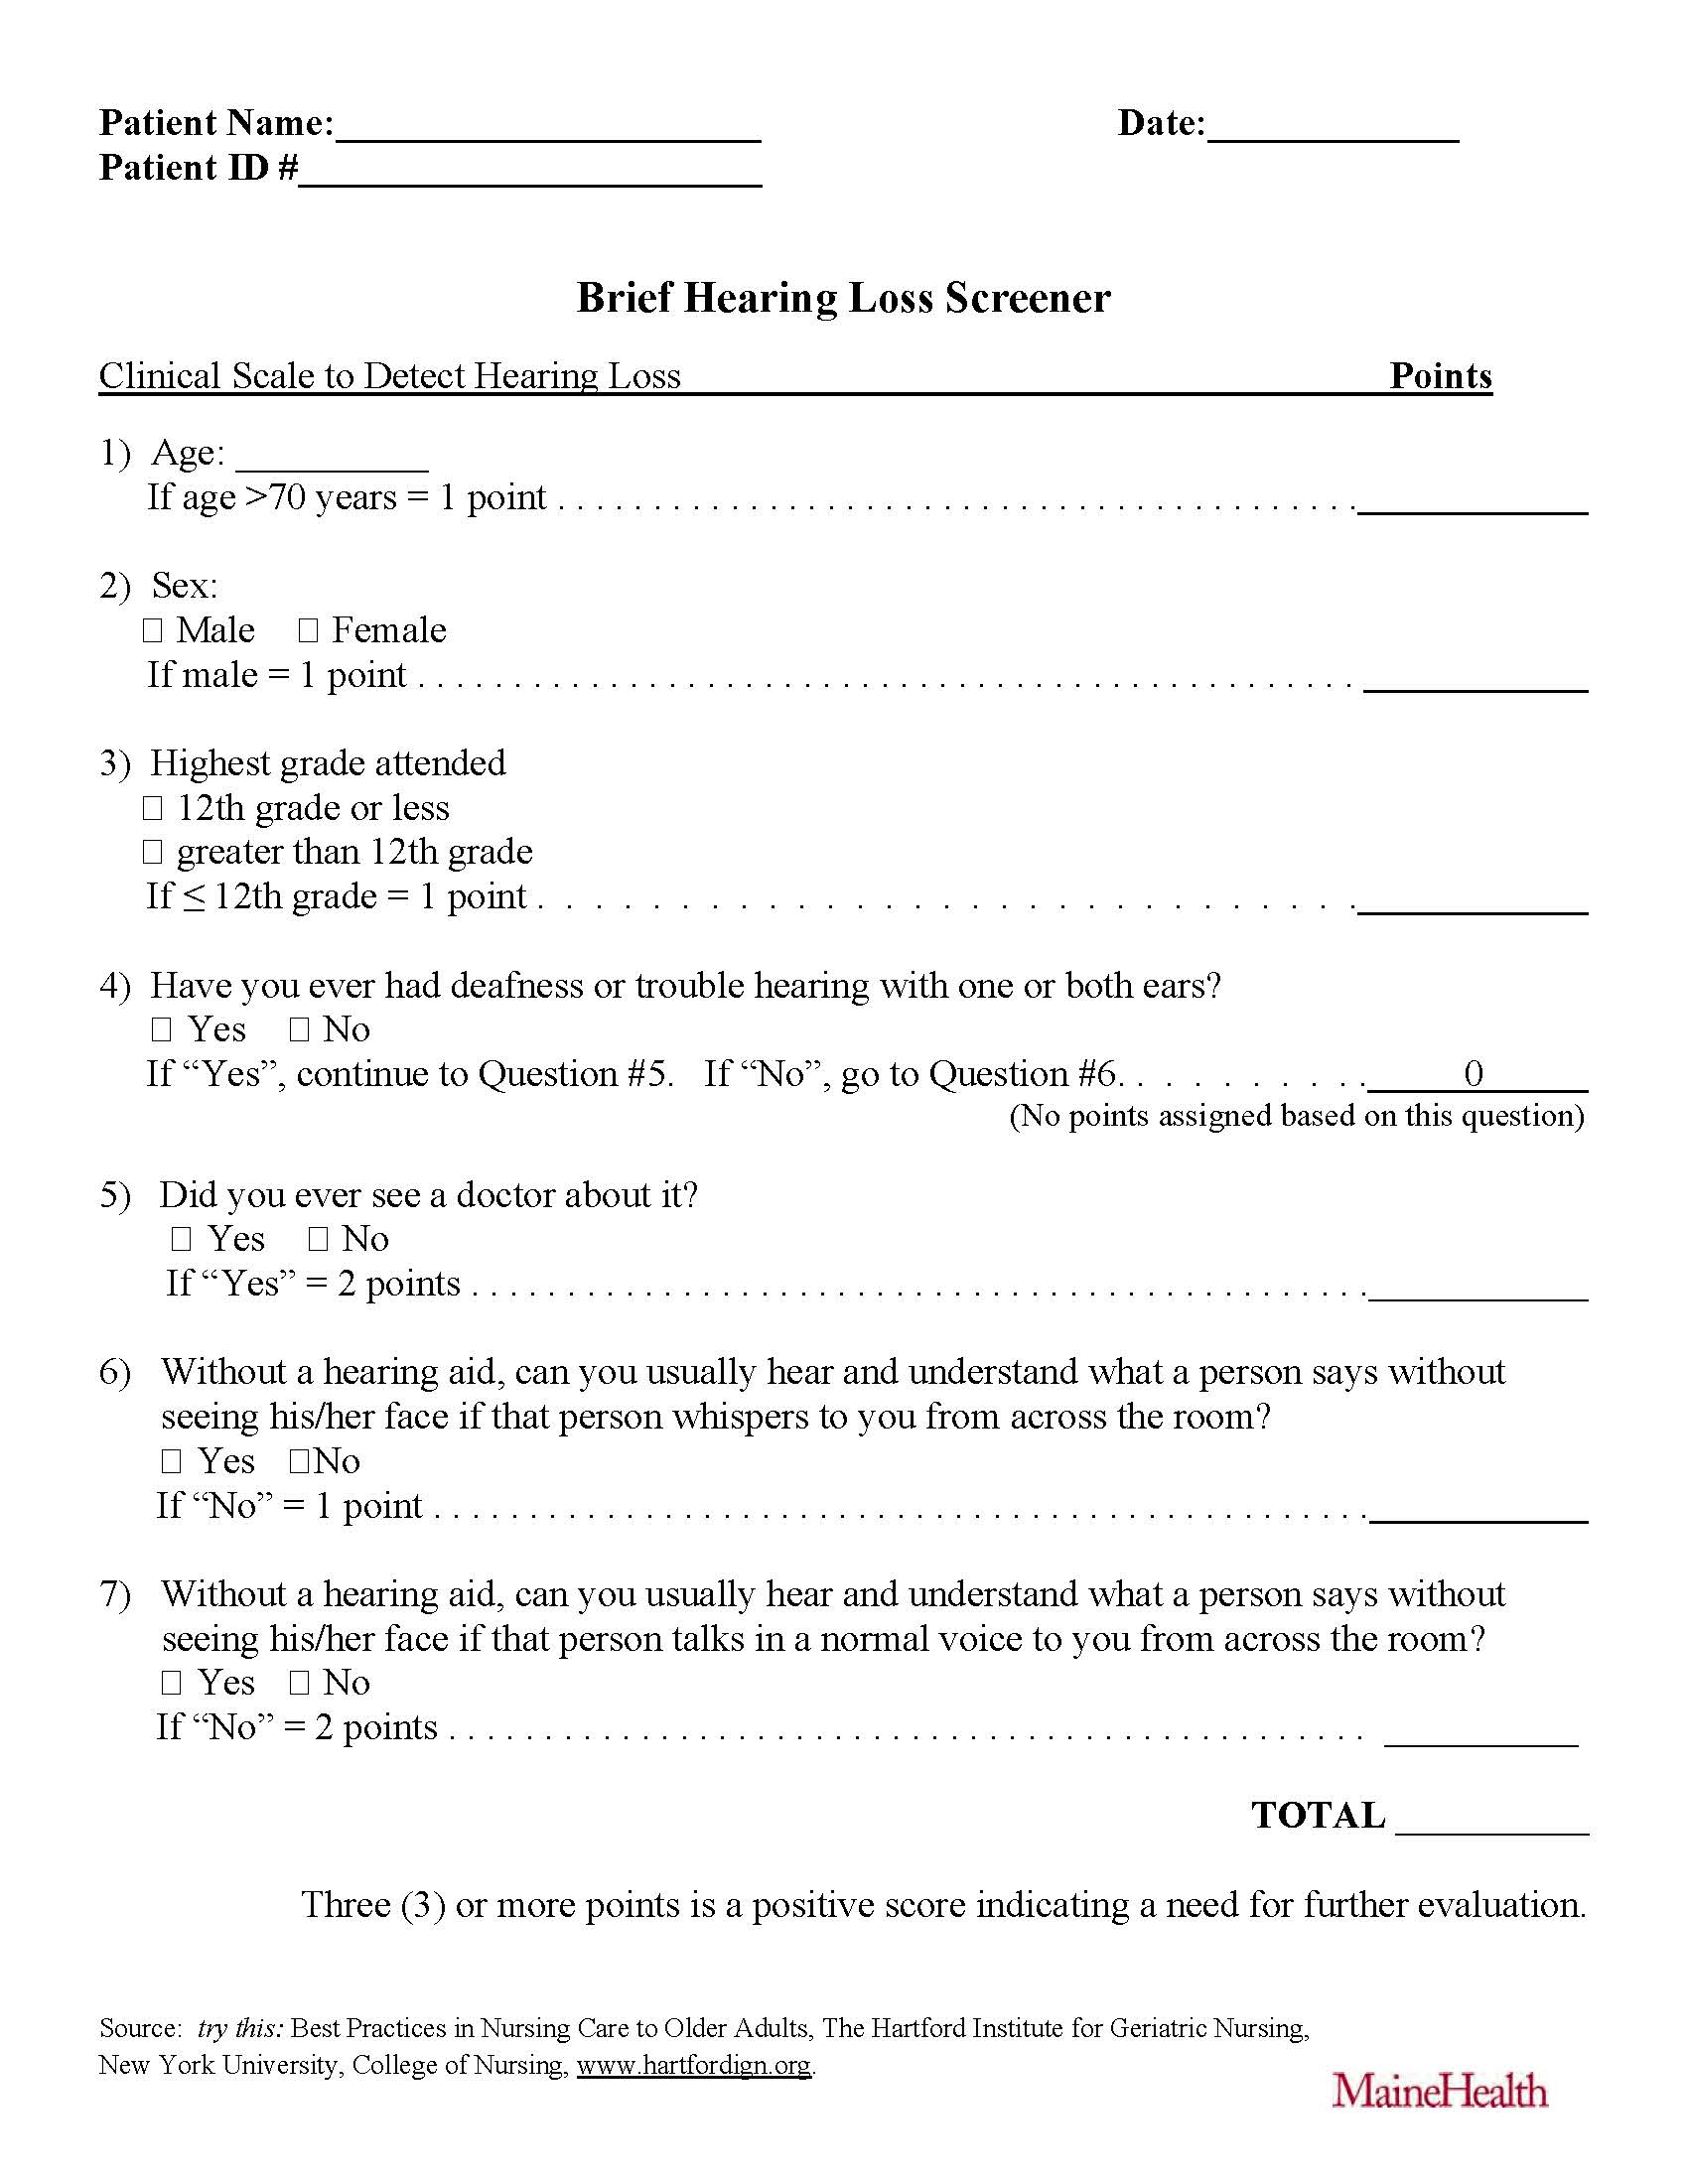 Pages from 33. Brief Hearing Loss Screener